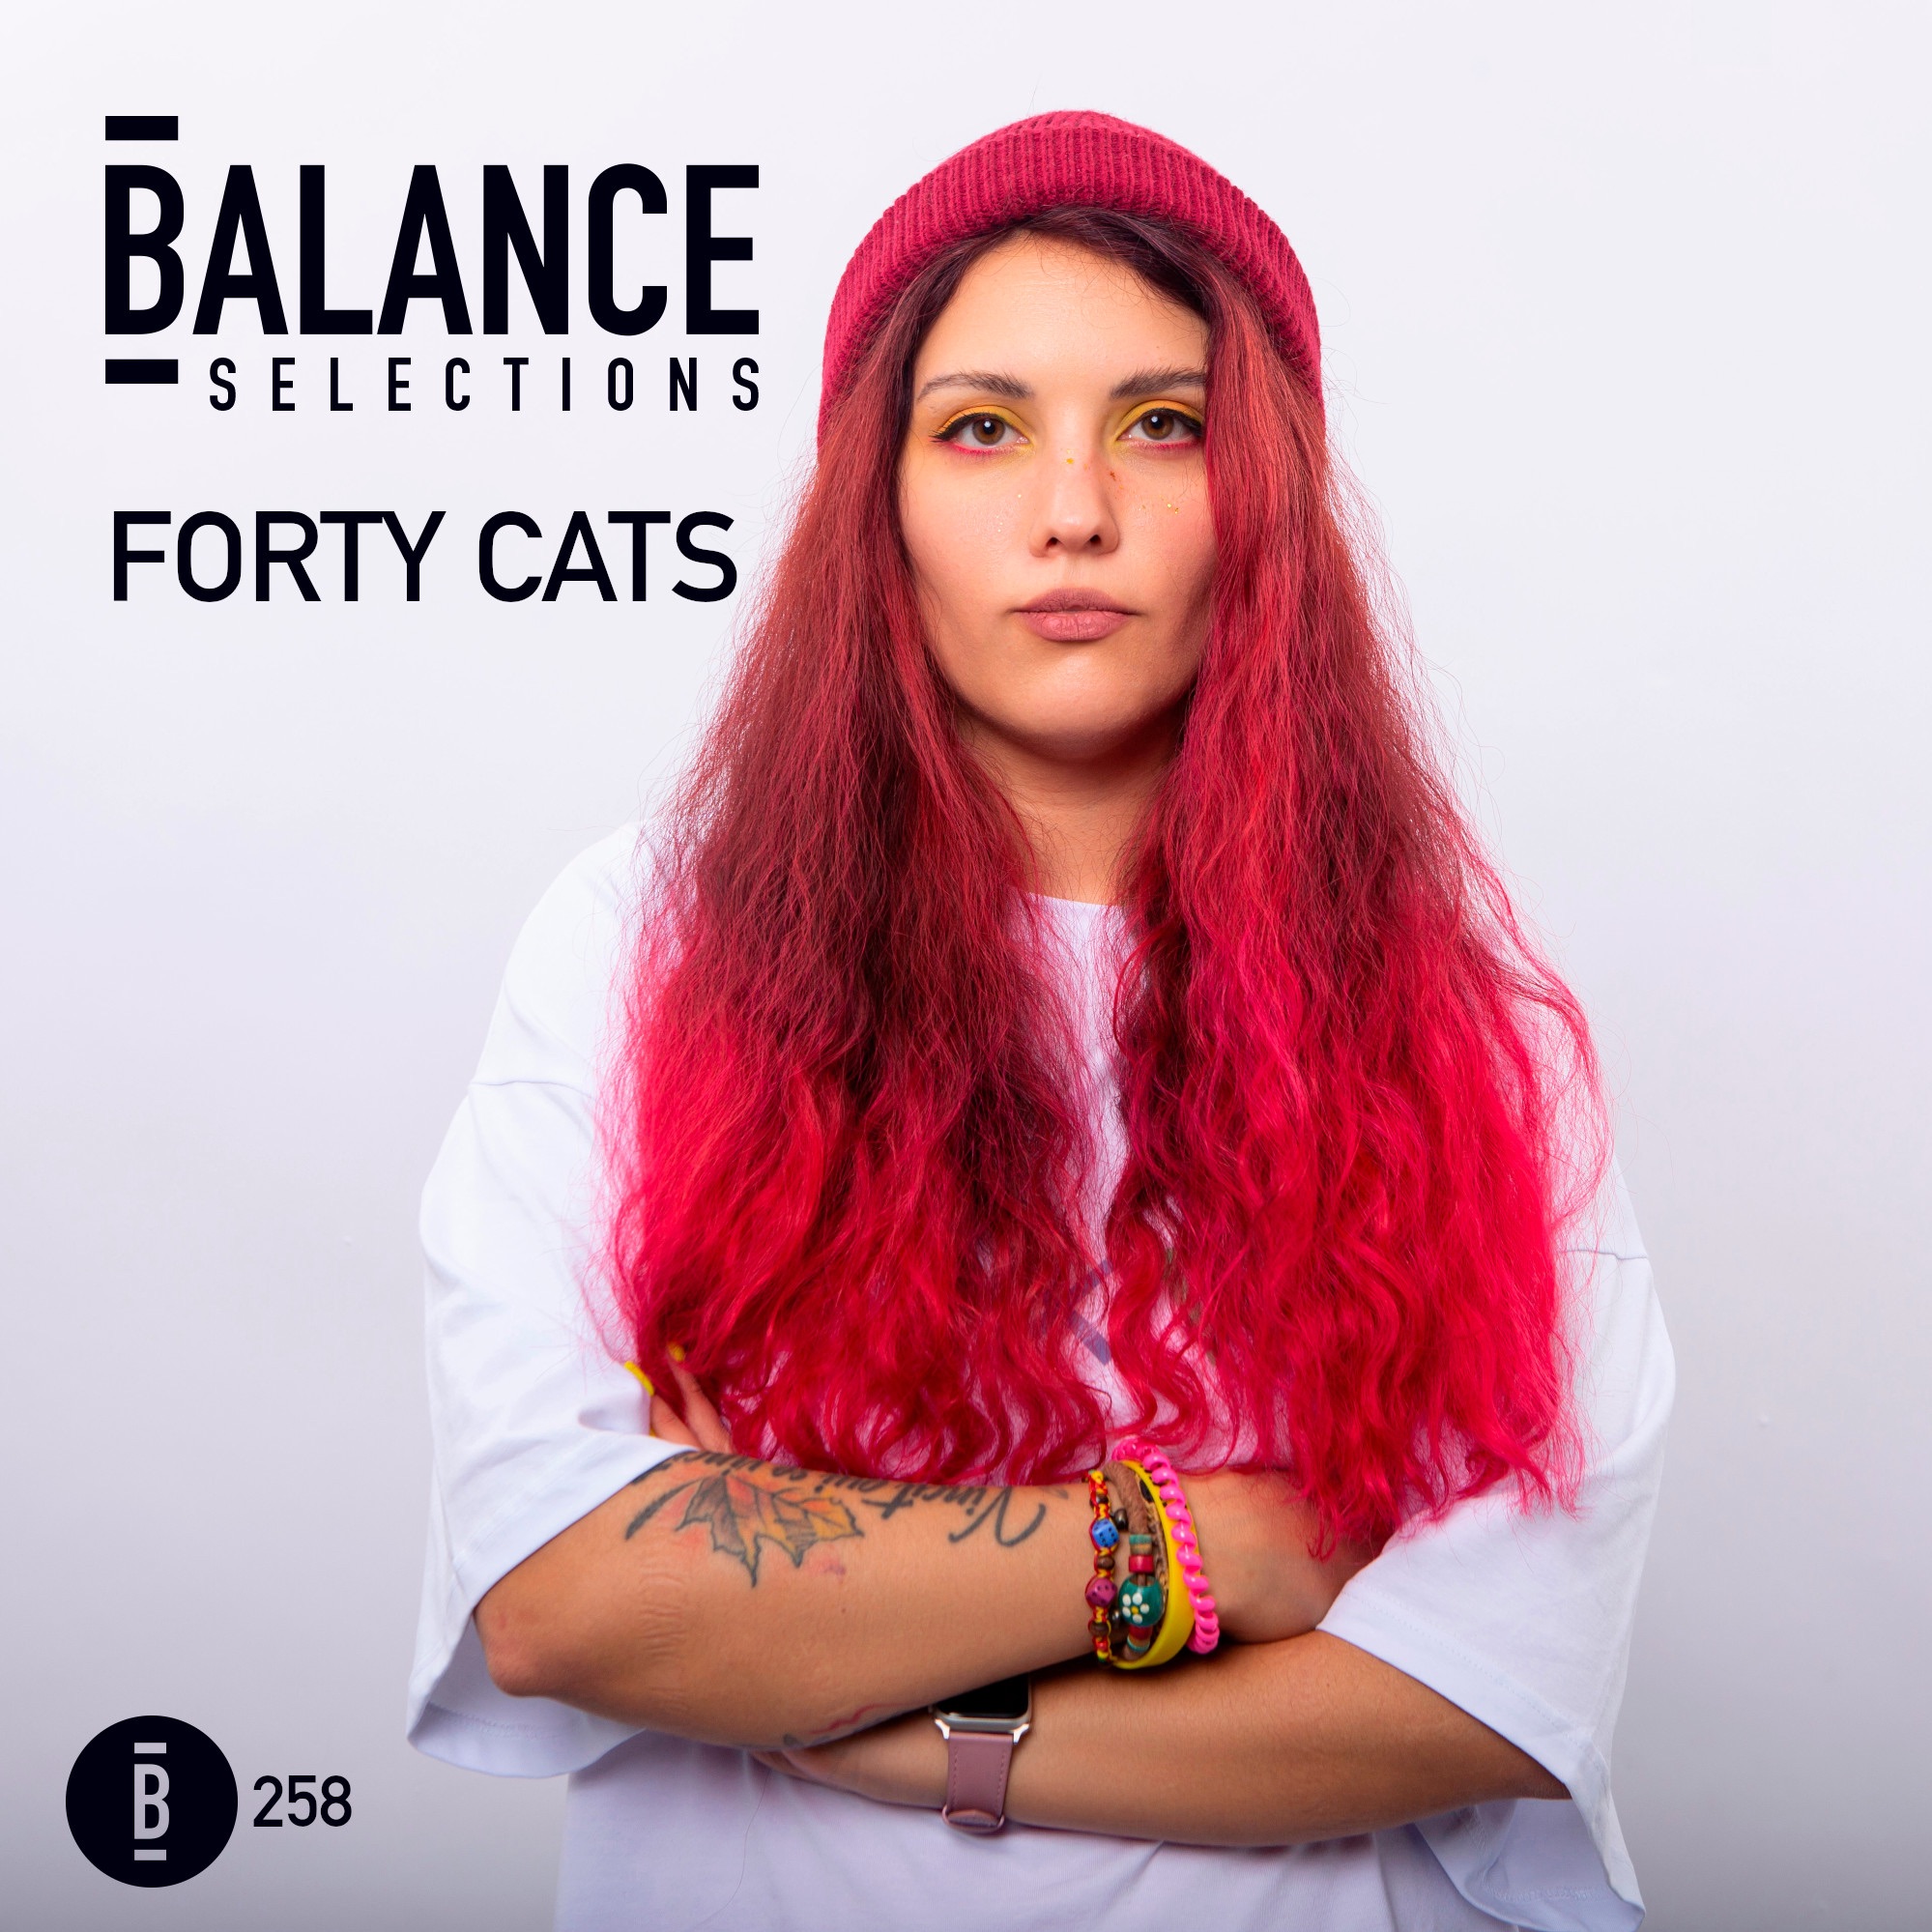 İndirin! Balance Selections 258: Forty Cats